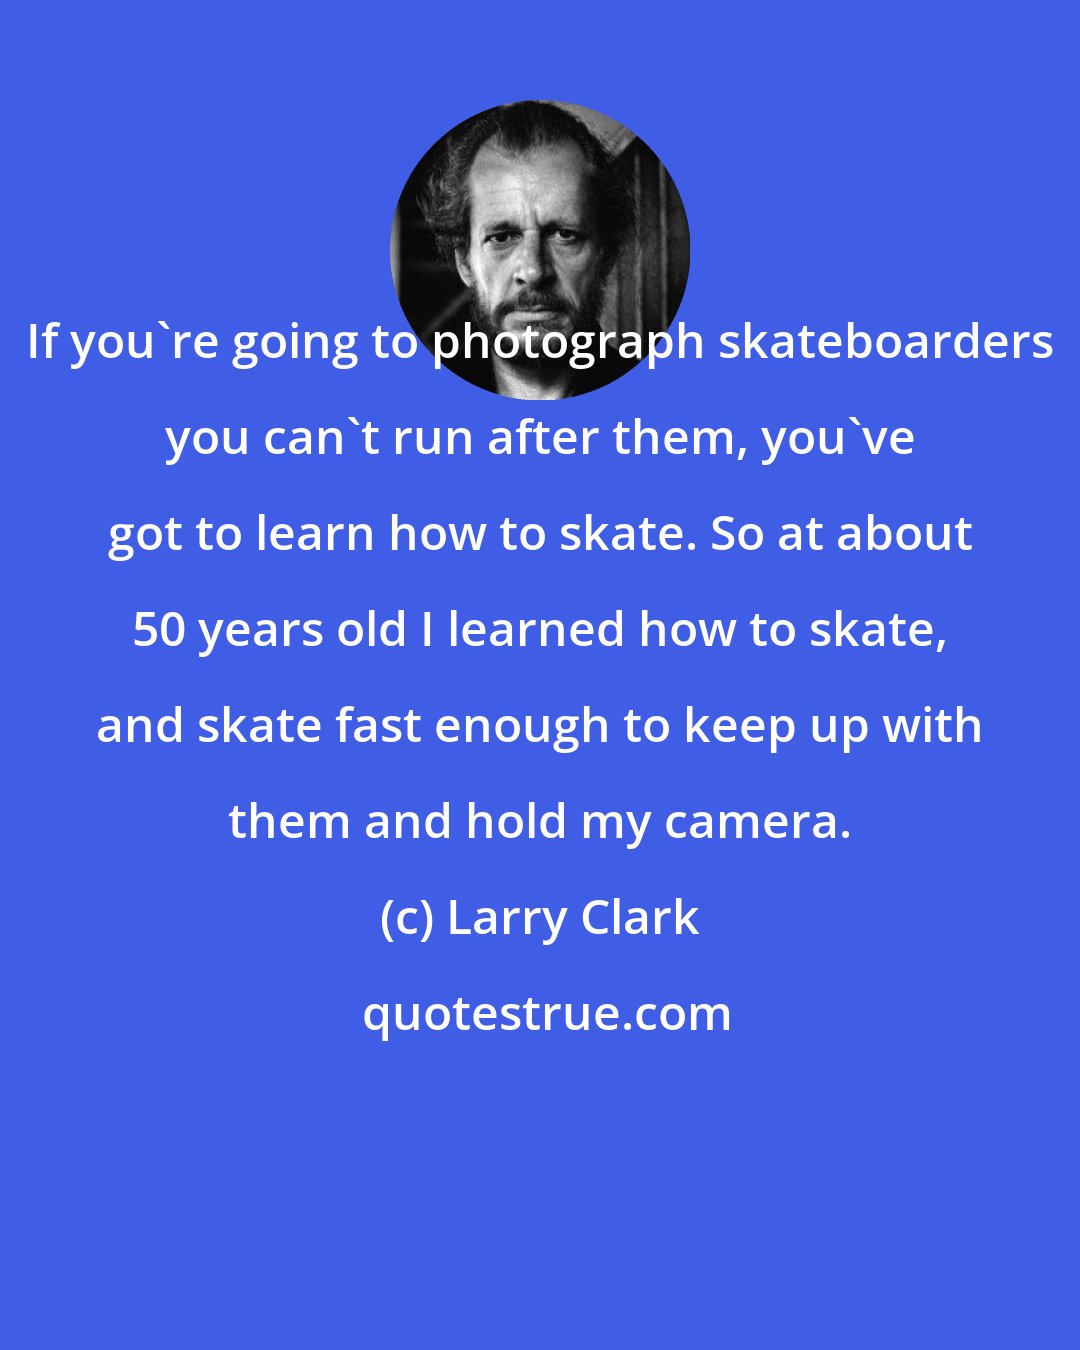 Larry Clark: If you're going to photograph skateboarders you can't run after them, you've got to learn how to skate. So at about 50 years old I learned how to skate, and skate fast enough to keep up with them and hold my camera.